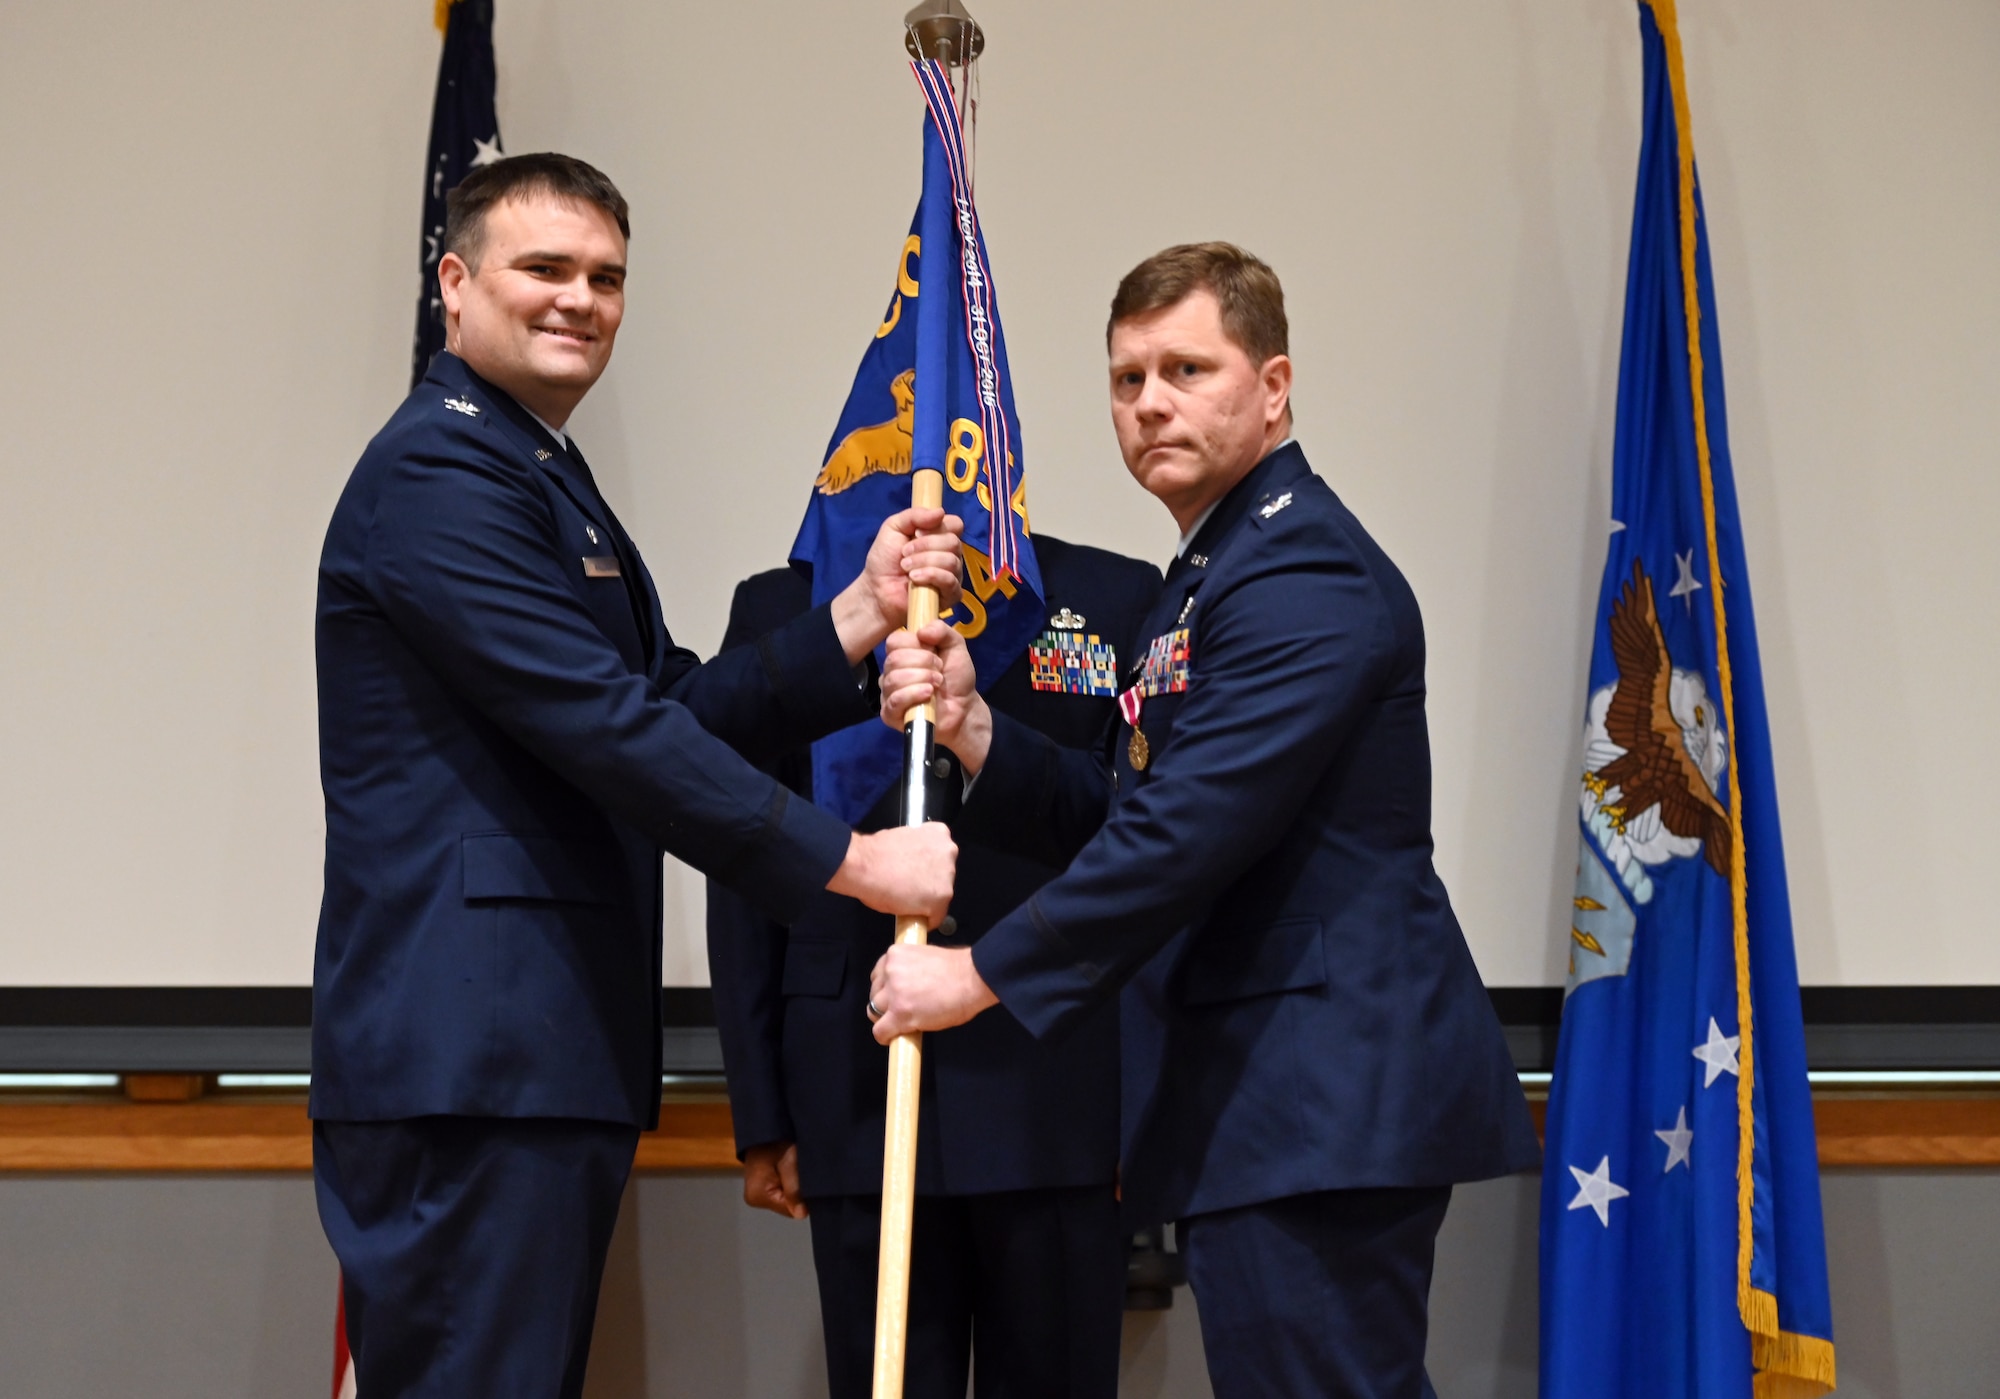 JOINT BASE SAN ANTONIO-LACKLAND, Texas --  
Col. Shaun Zabel assumed command of the 854th Combat Operations Squadron, 960th Cyberspace Wing, at Joint Base San Antonio-Kelly Annex, Texas, on January 6, 2024. He was also awarded with a Meritorious Service Medal for his outstanding service as Deputy Commander, 960th Cyberspace Operations Group.